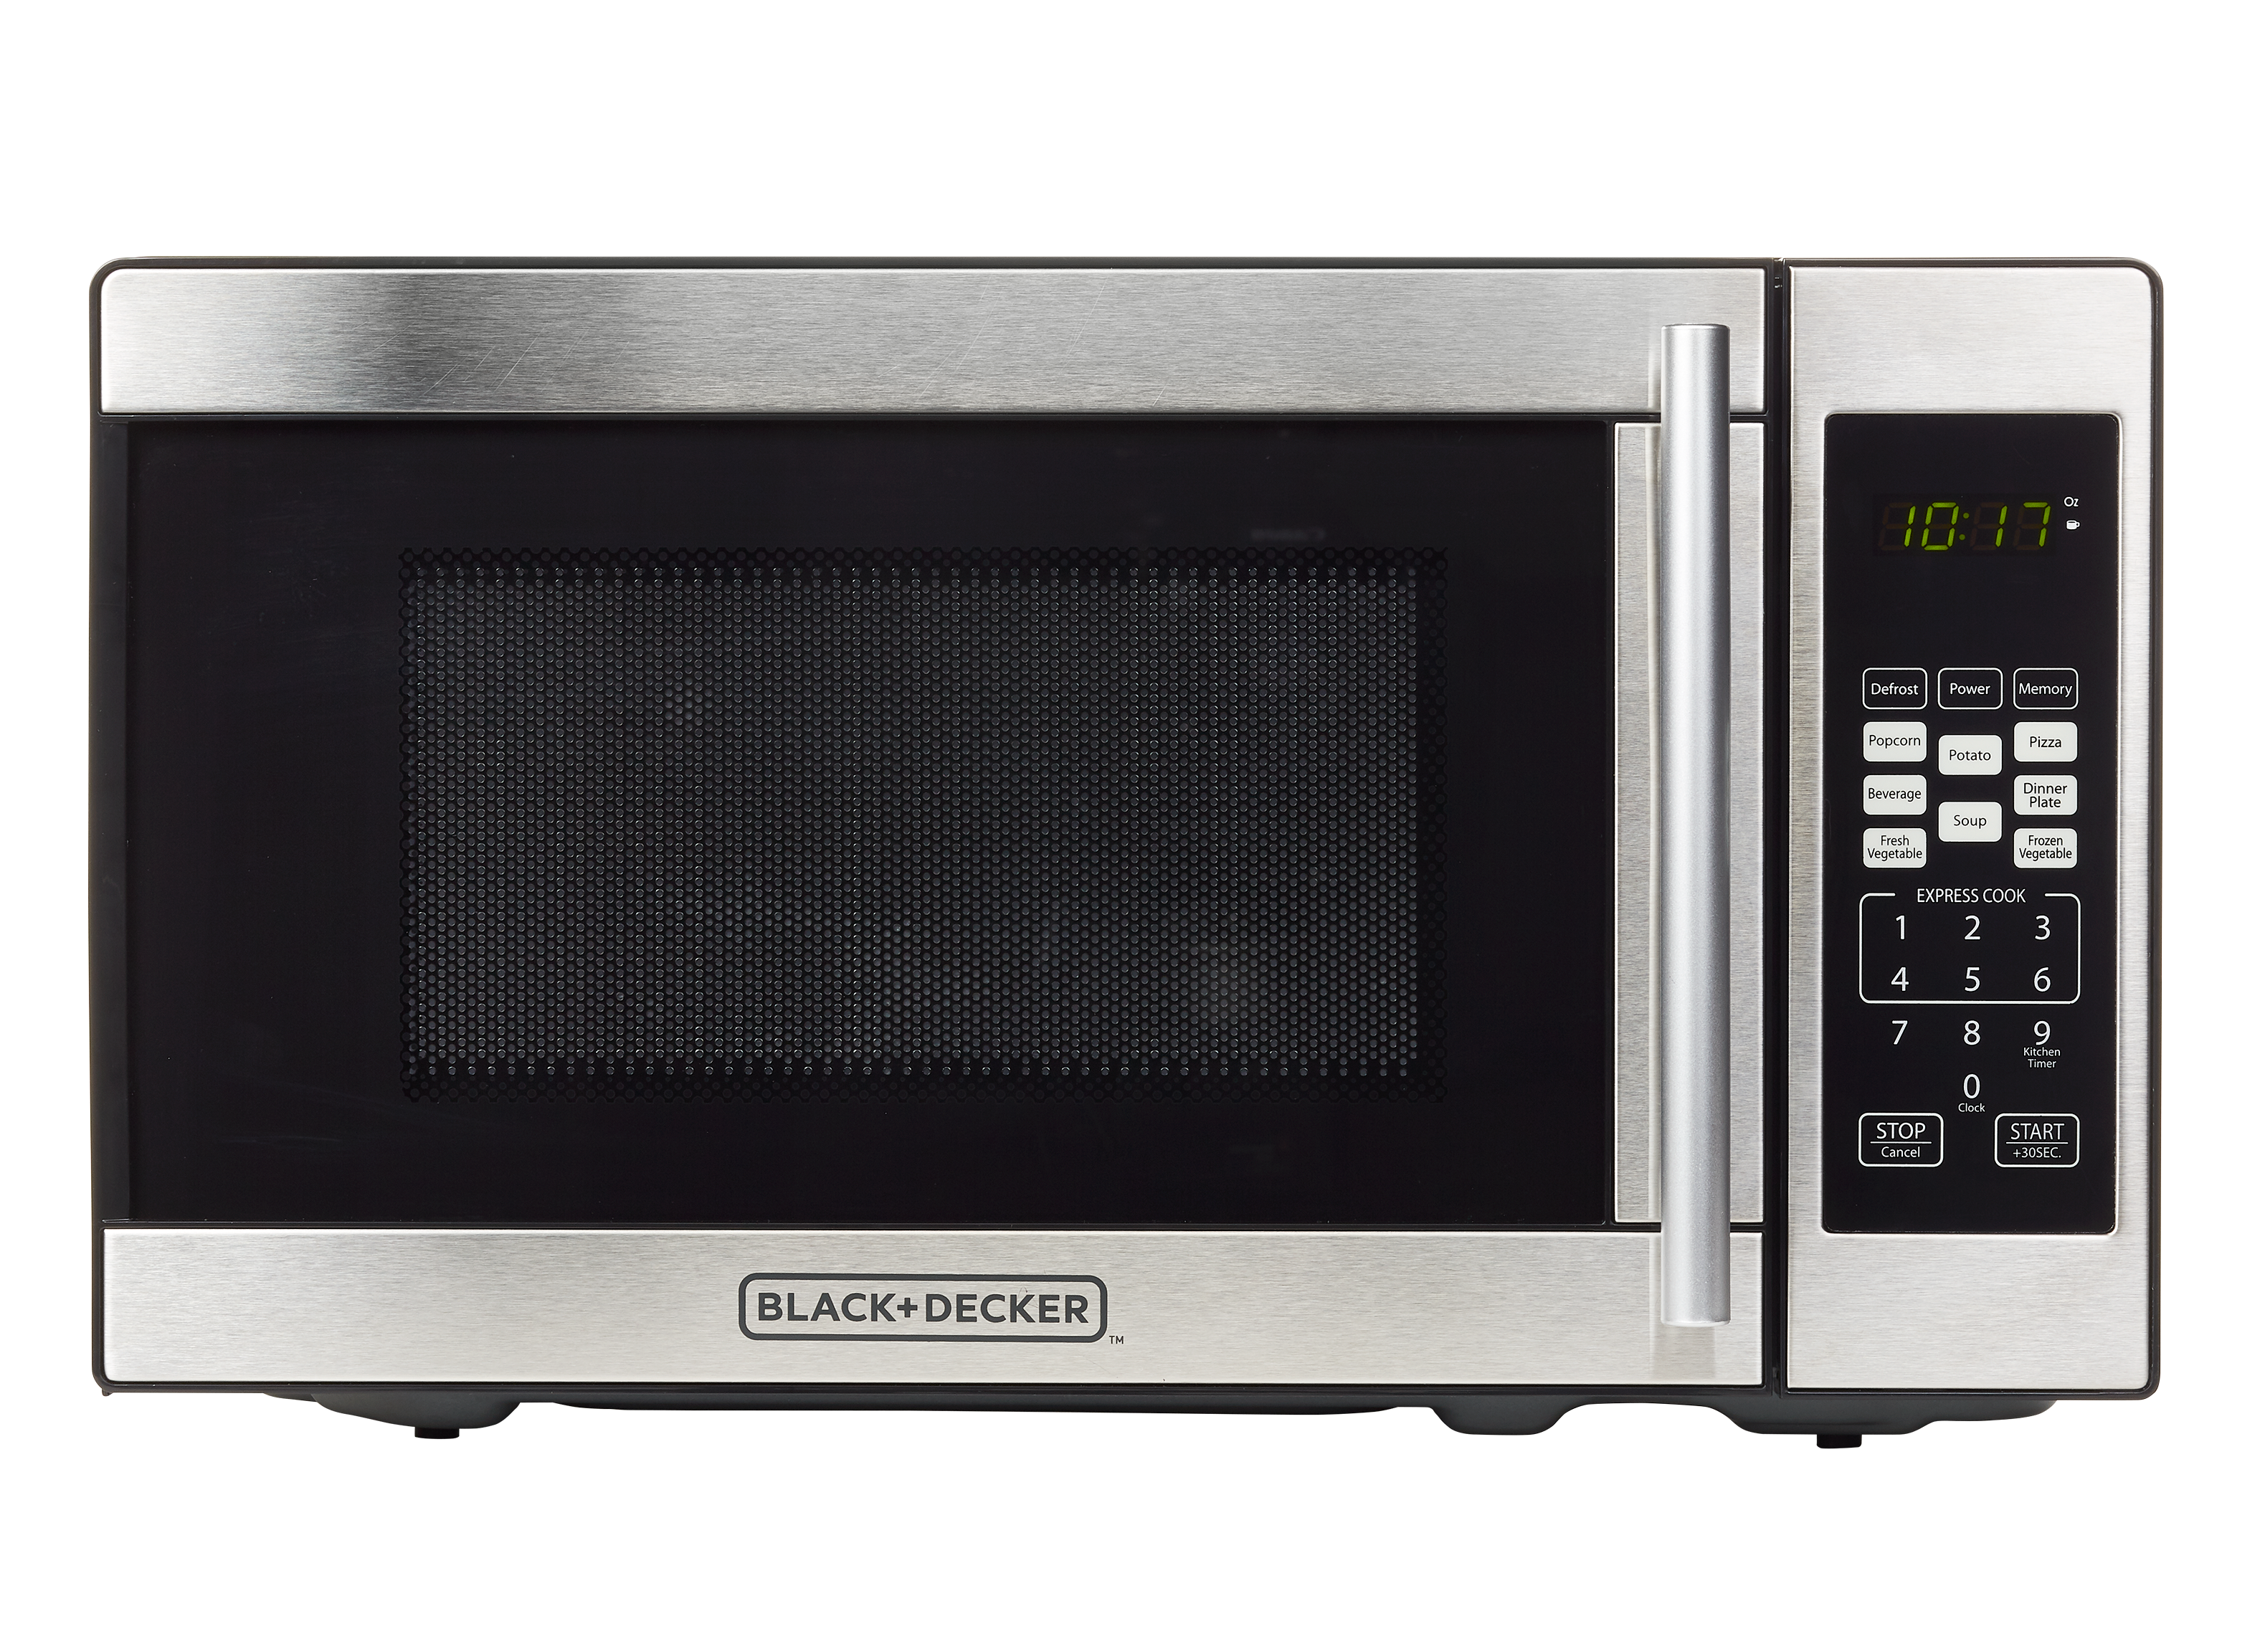 Black+Decker EM720CPN-P Microwave Oven Review - Consumer Reports